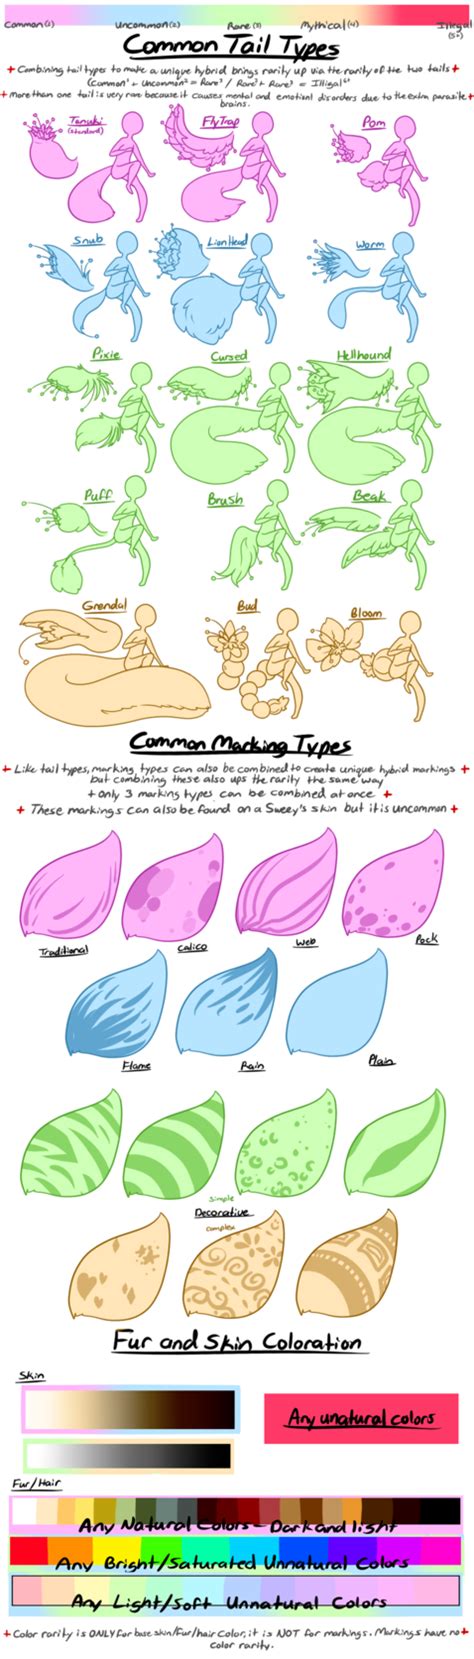 Edit Added A Bit Of Info Below About The Number Of Eyes Each Tail Has And What Can Be Done With